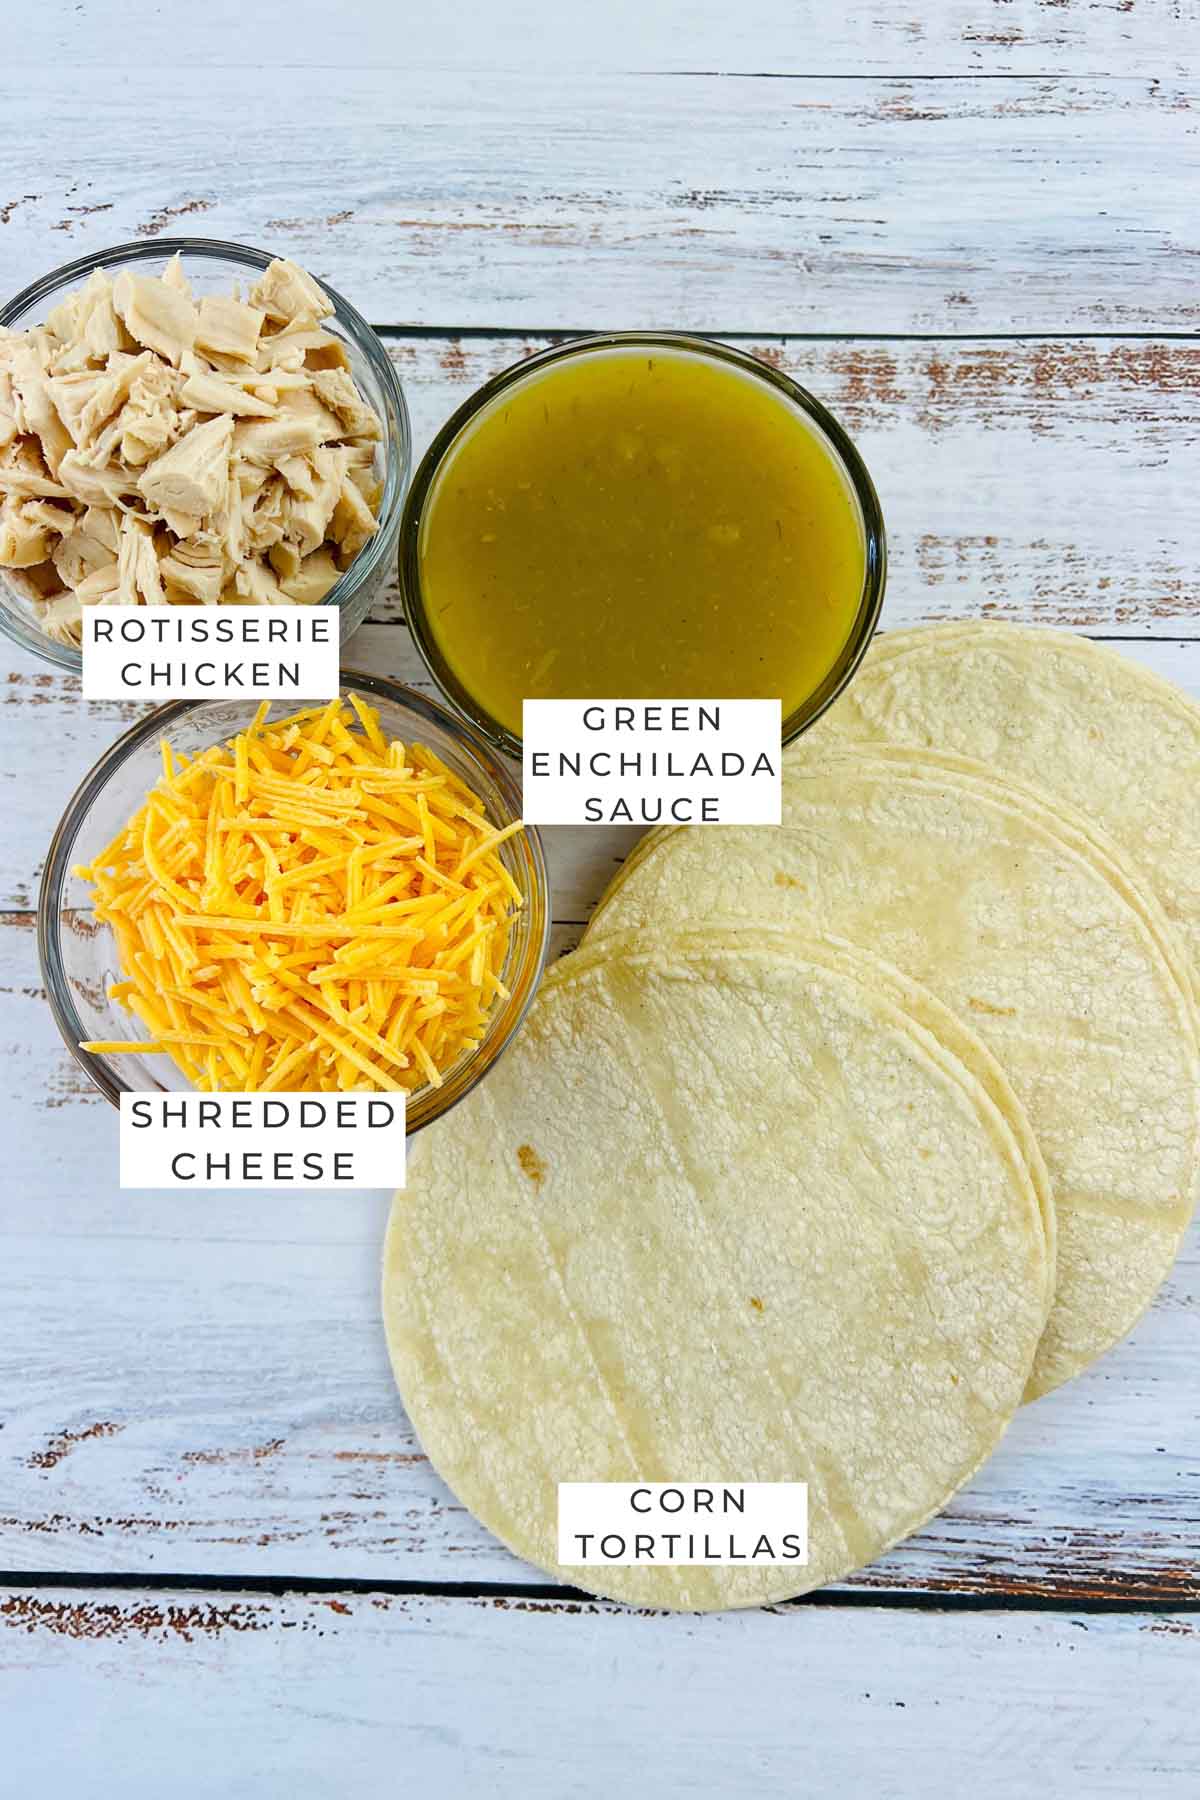 Labeled ingredients for the enchiladas.